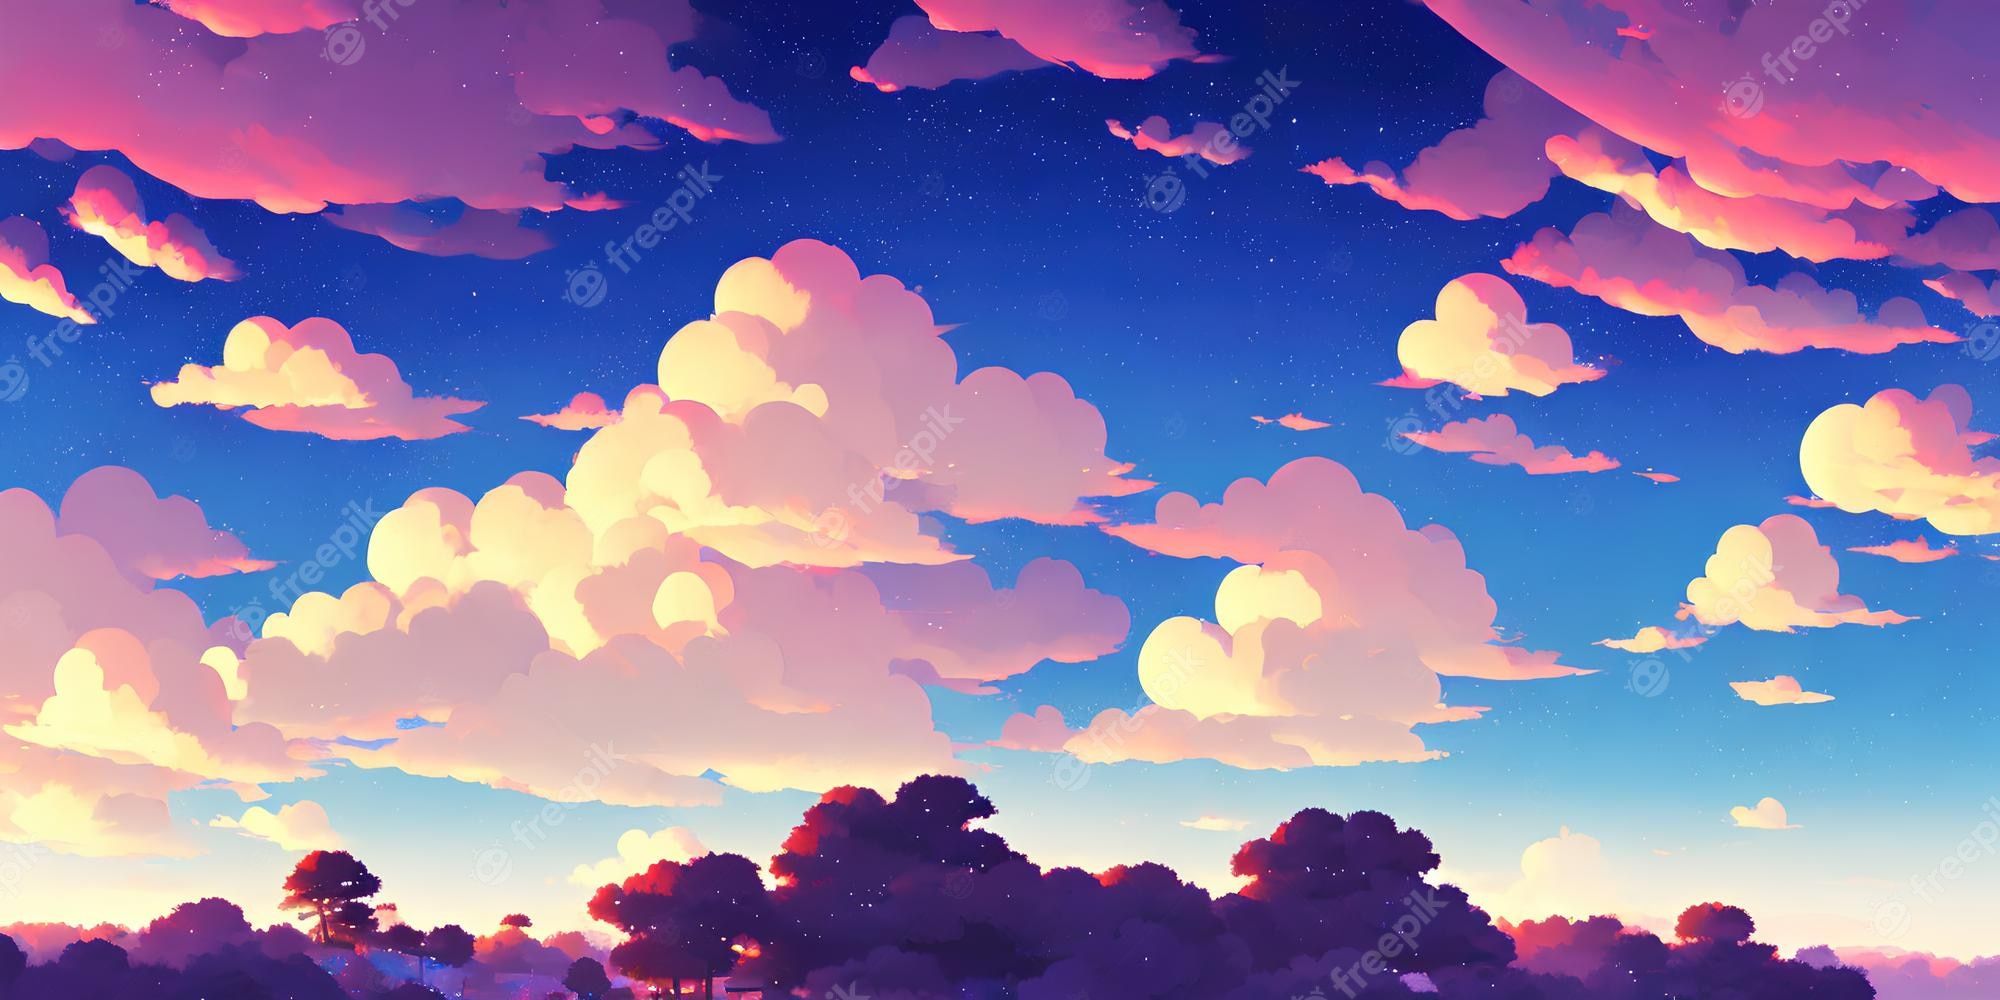 Premium Photo. Natural anime landscape with bright sky and juicy colors